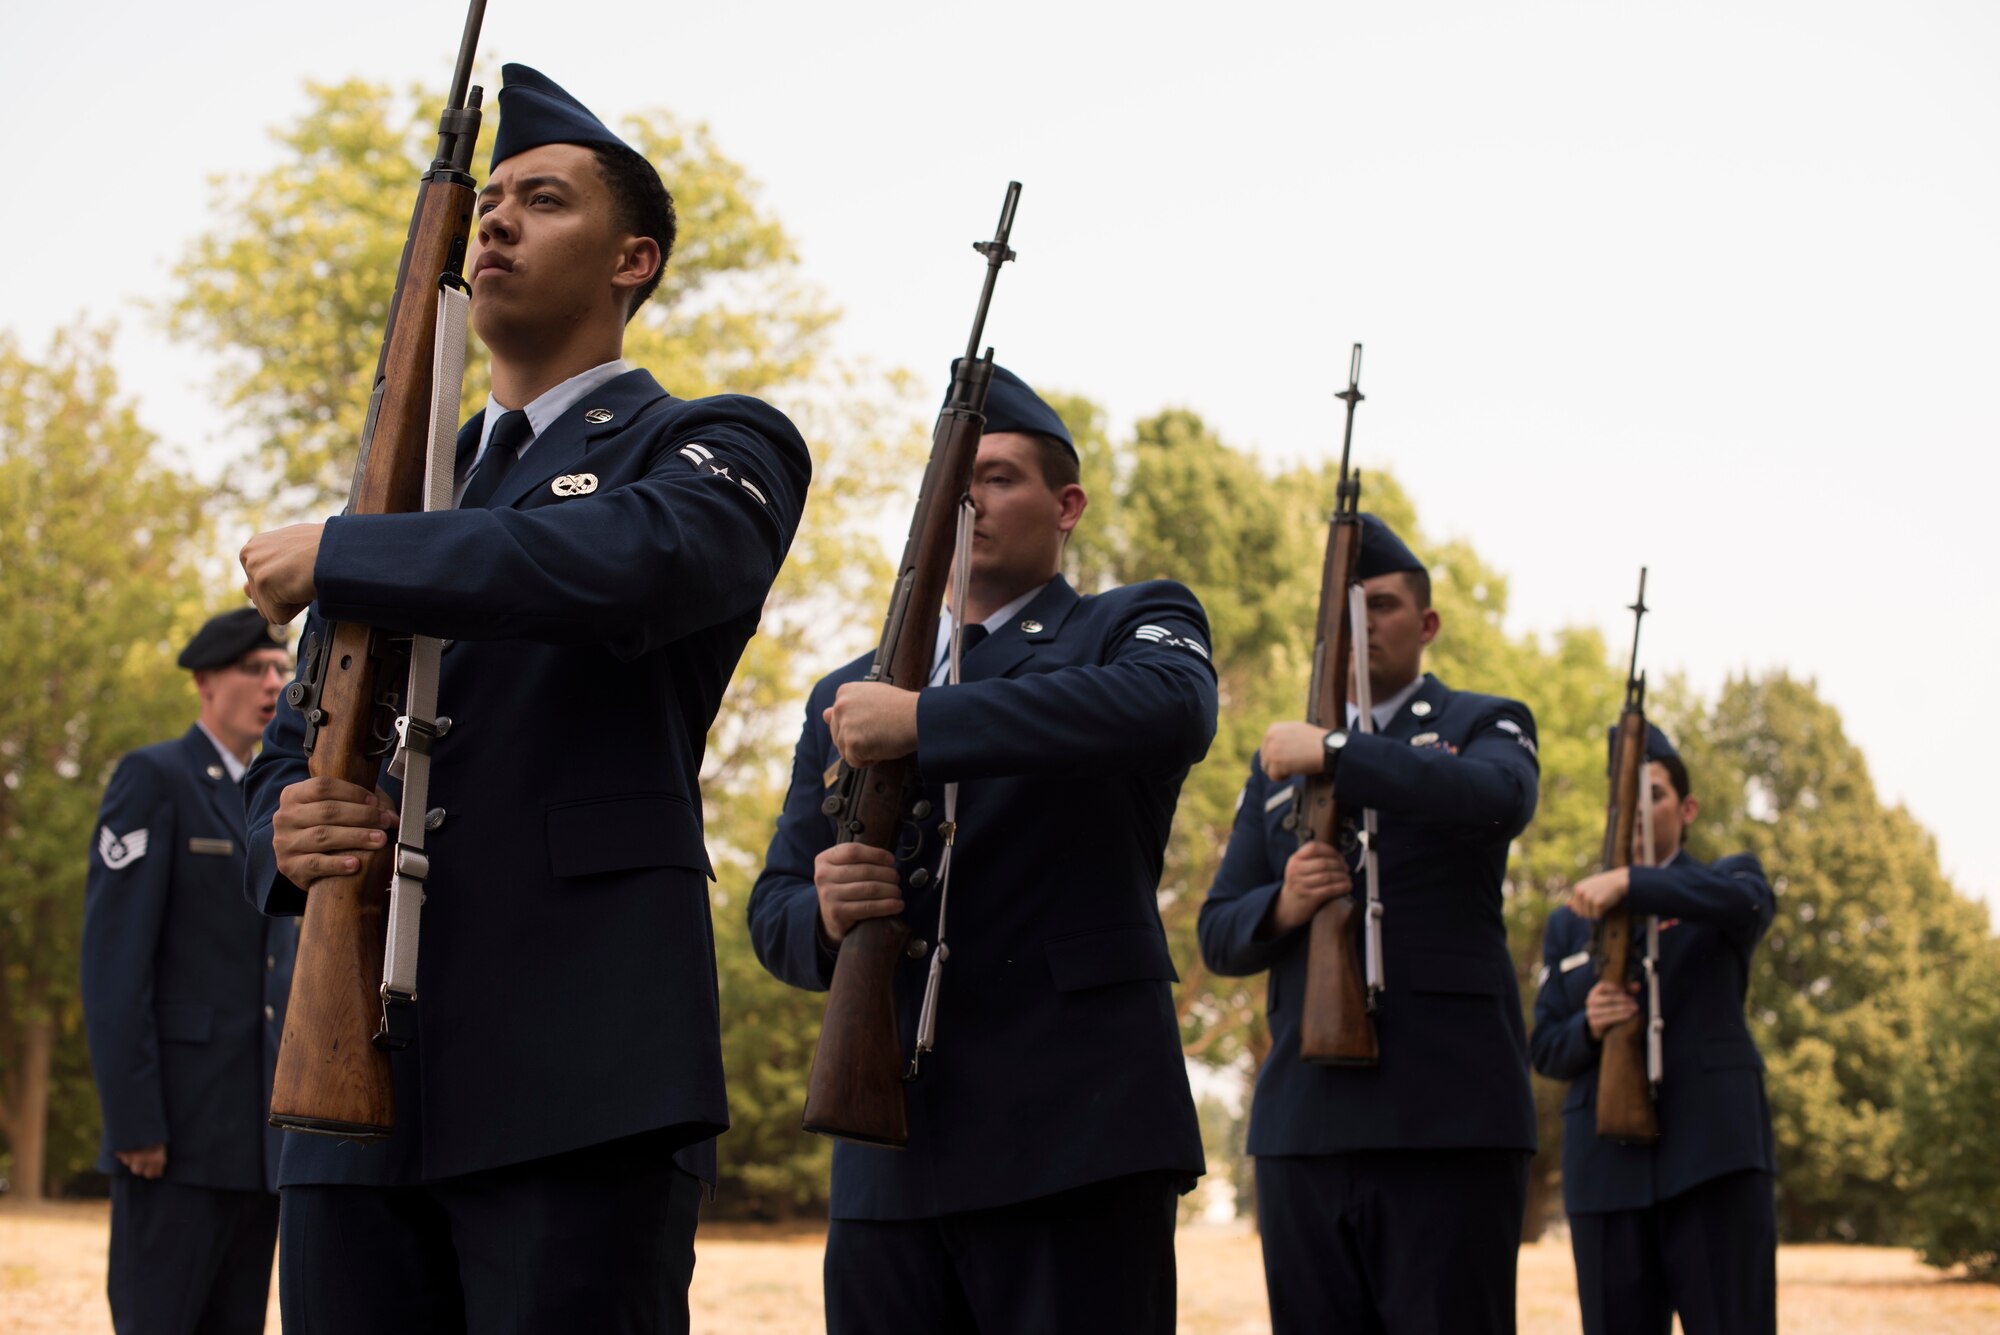 A Base Honor Guard firing party stands ready to fire a volley during a mock funeral ceremony at Fairchild Air Force Base, Washington, Aug. 10, 2018. A “3-rifle volley” is typically a formation of several Honor Guardsmen that fire three reports (shots) in unison to honor a fallen service member during a funeral. (U.S. Air Force photo/Senior Airman Ryan Lackey)